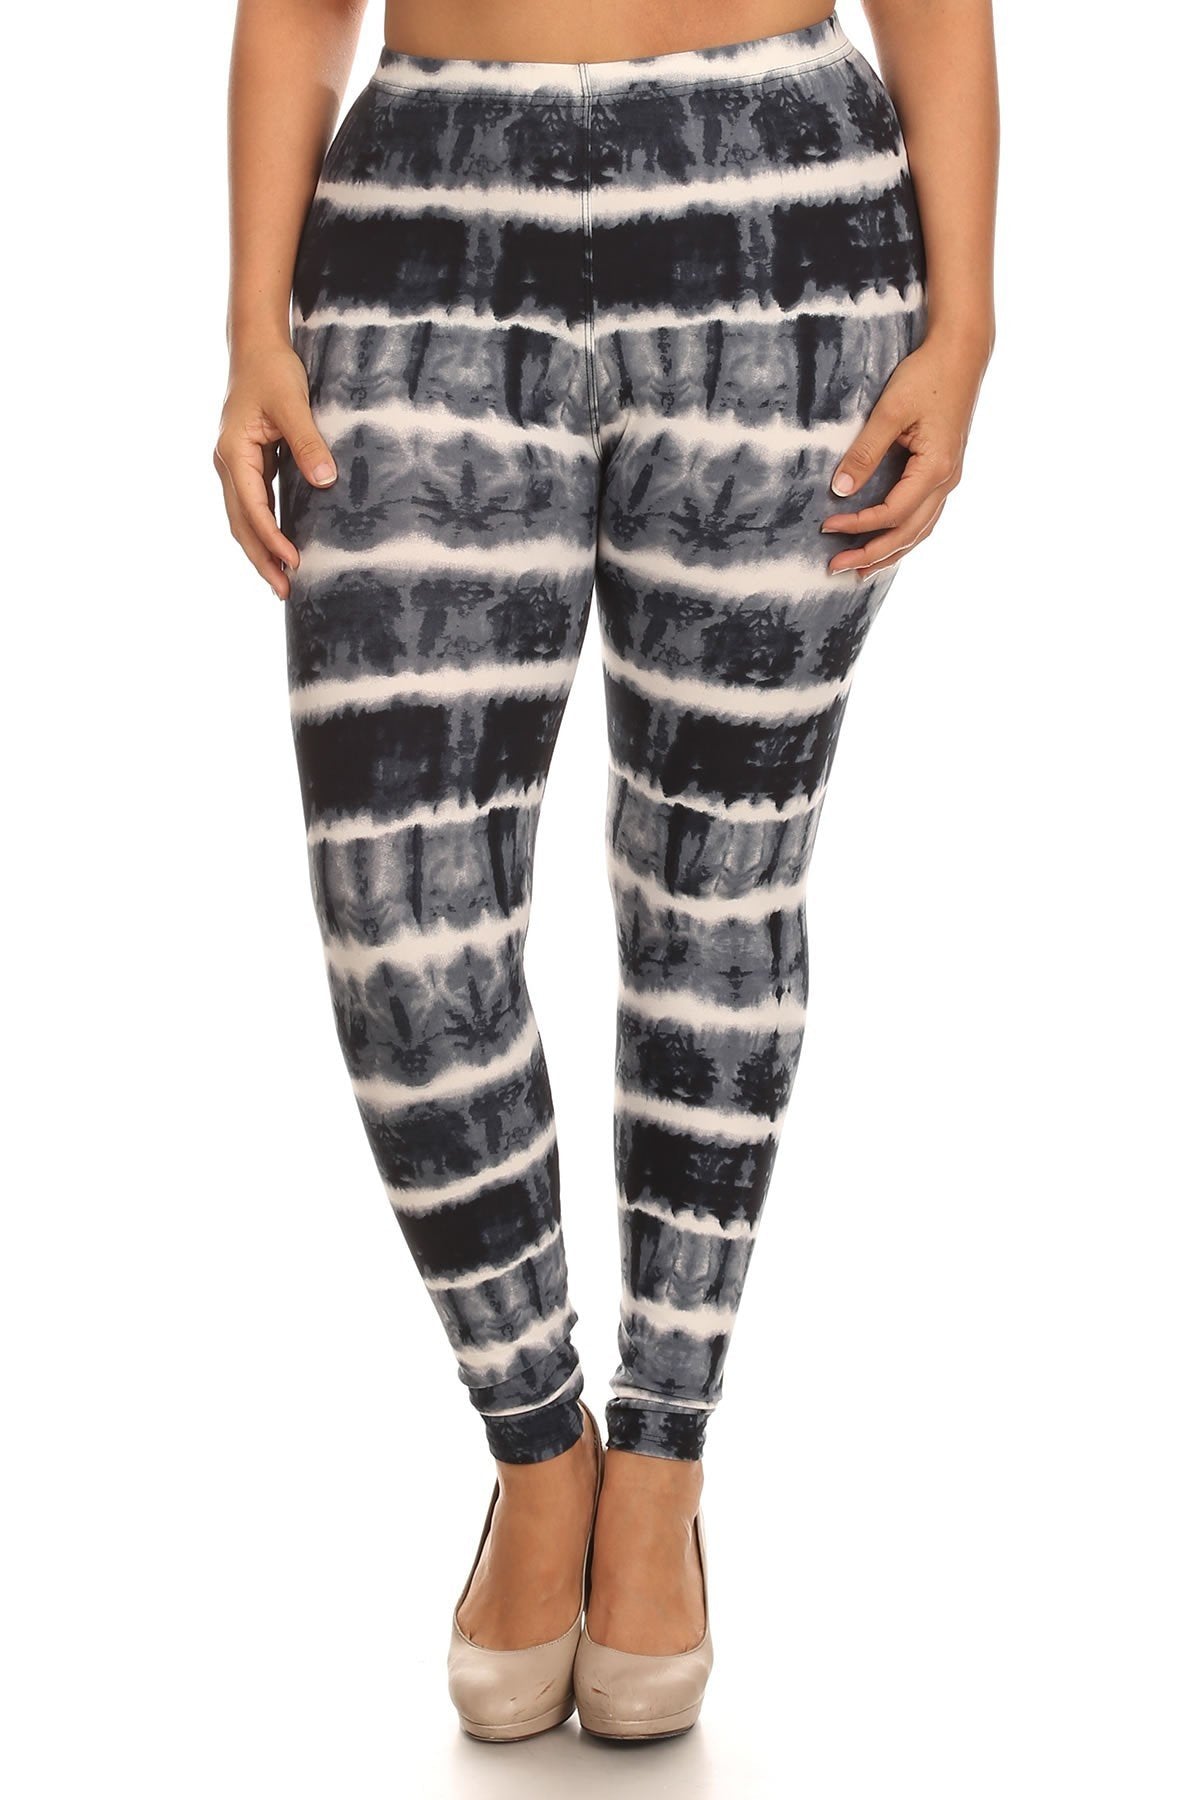 Plus Tie Dye Print, Full Length Leggings In A Fitted Style With A Banded High Waist